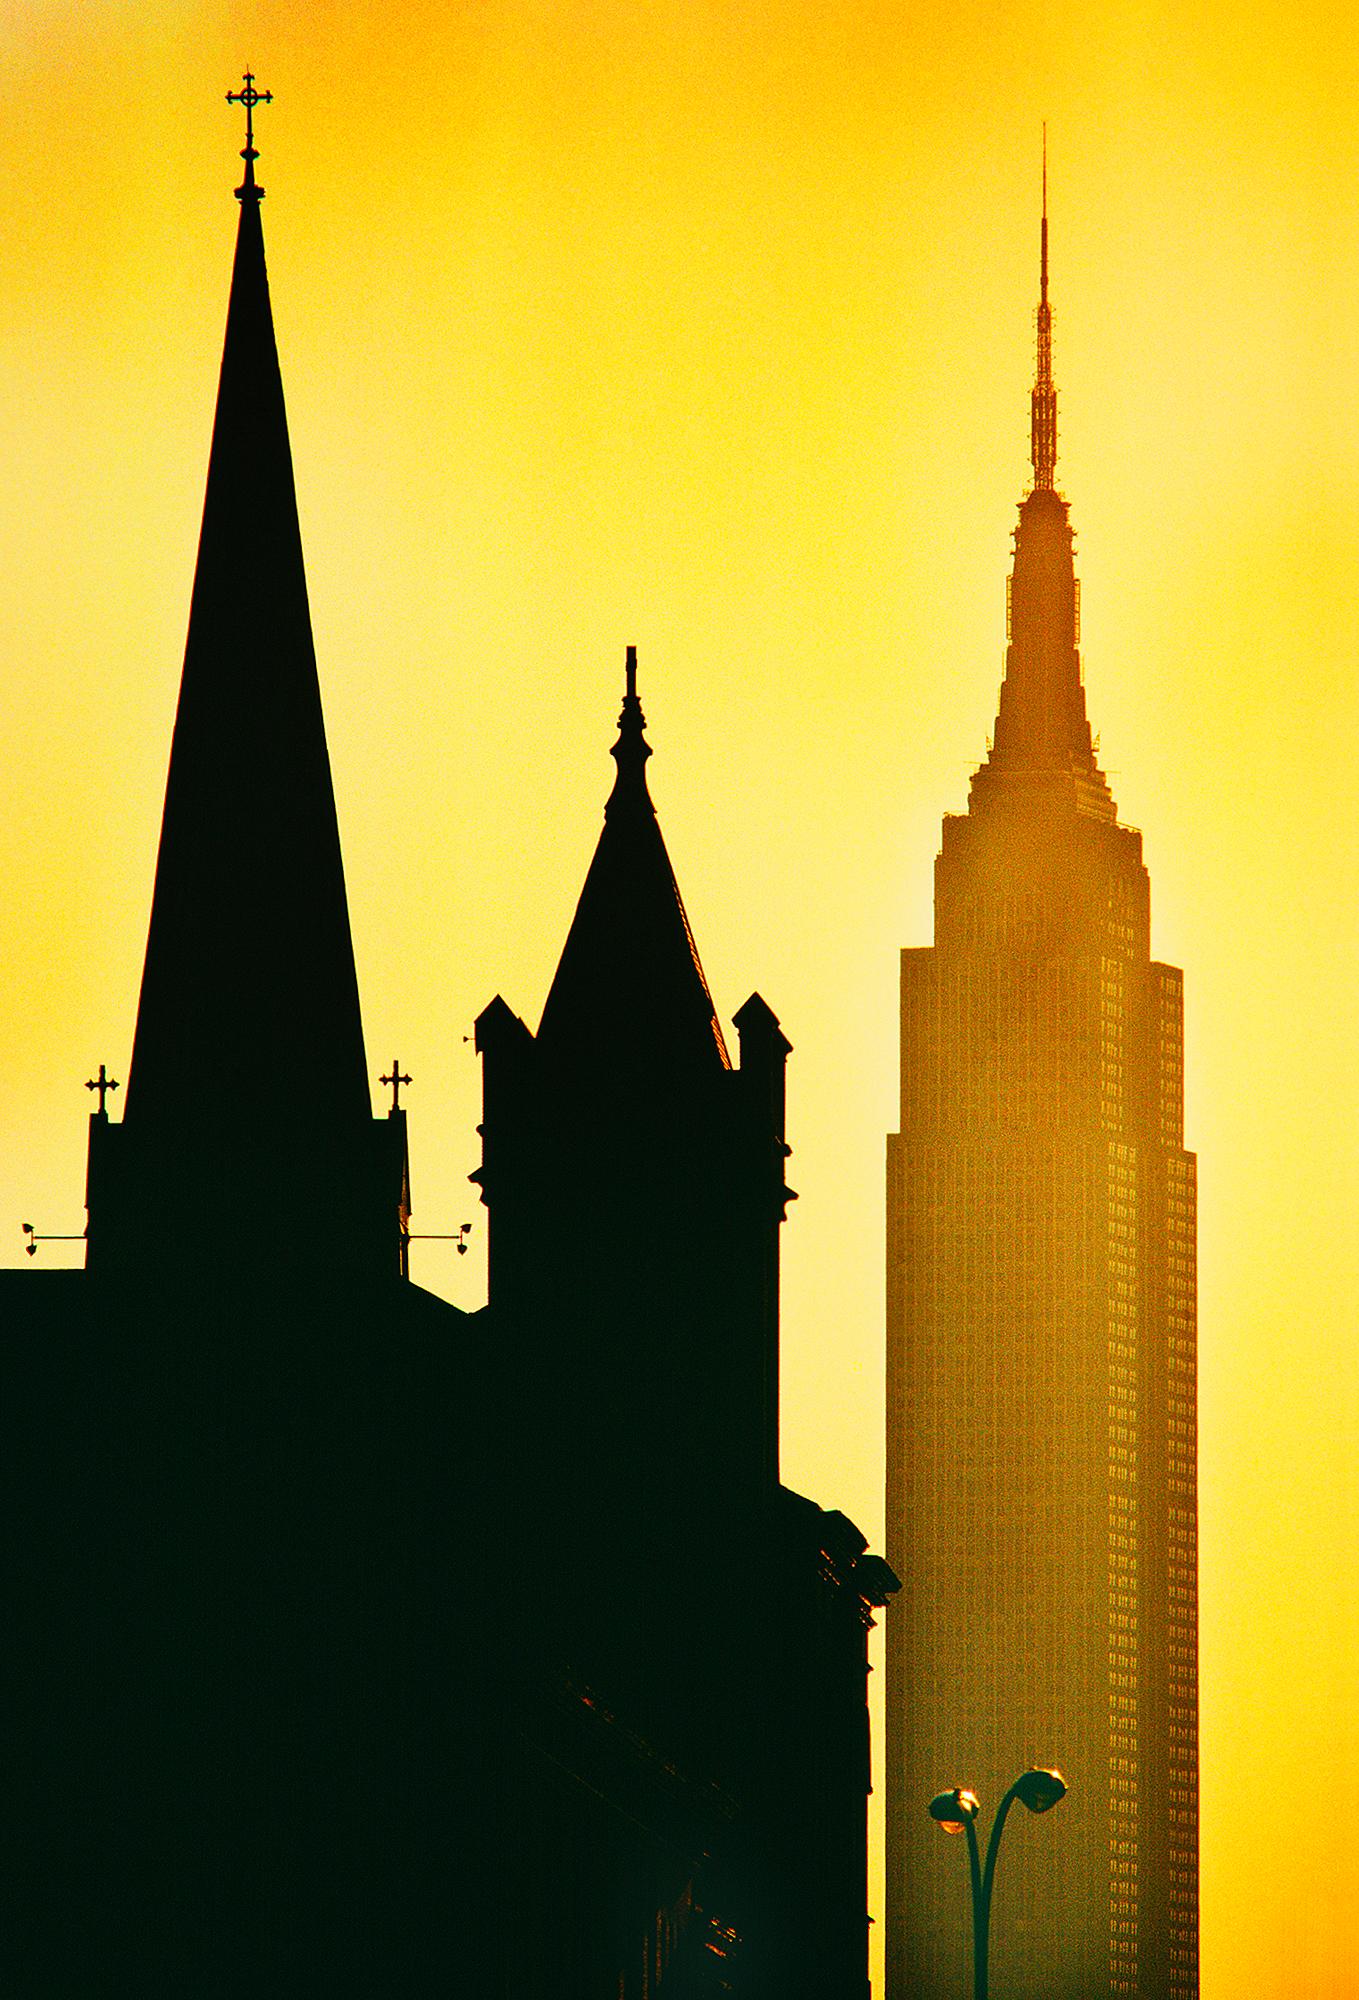 Mitchell Funk Landscape Photograph - Inspiring Spires: Empire State Building in New York City at Gold Sunset